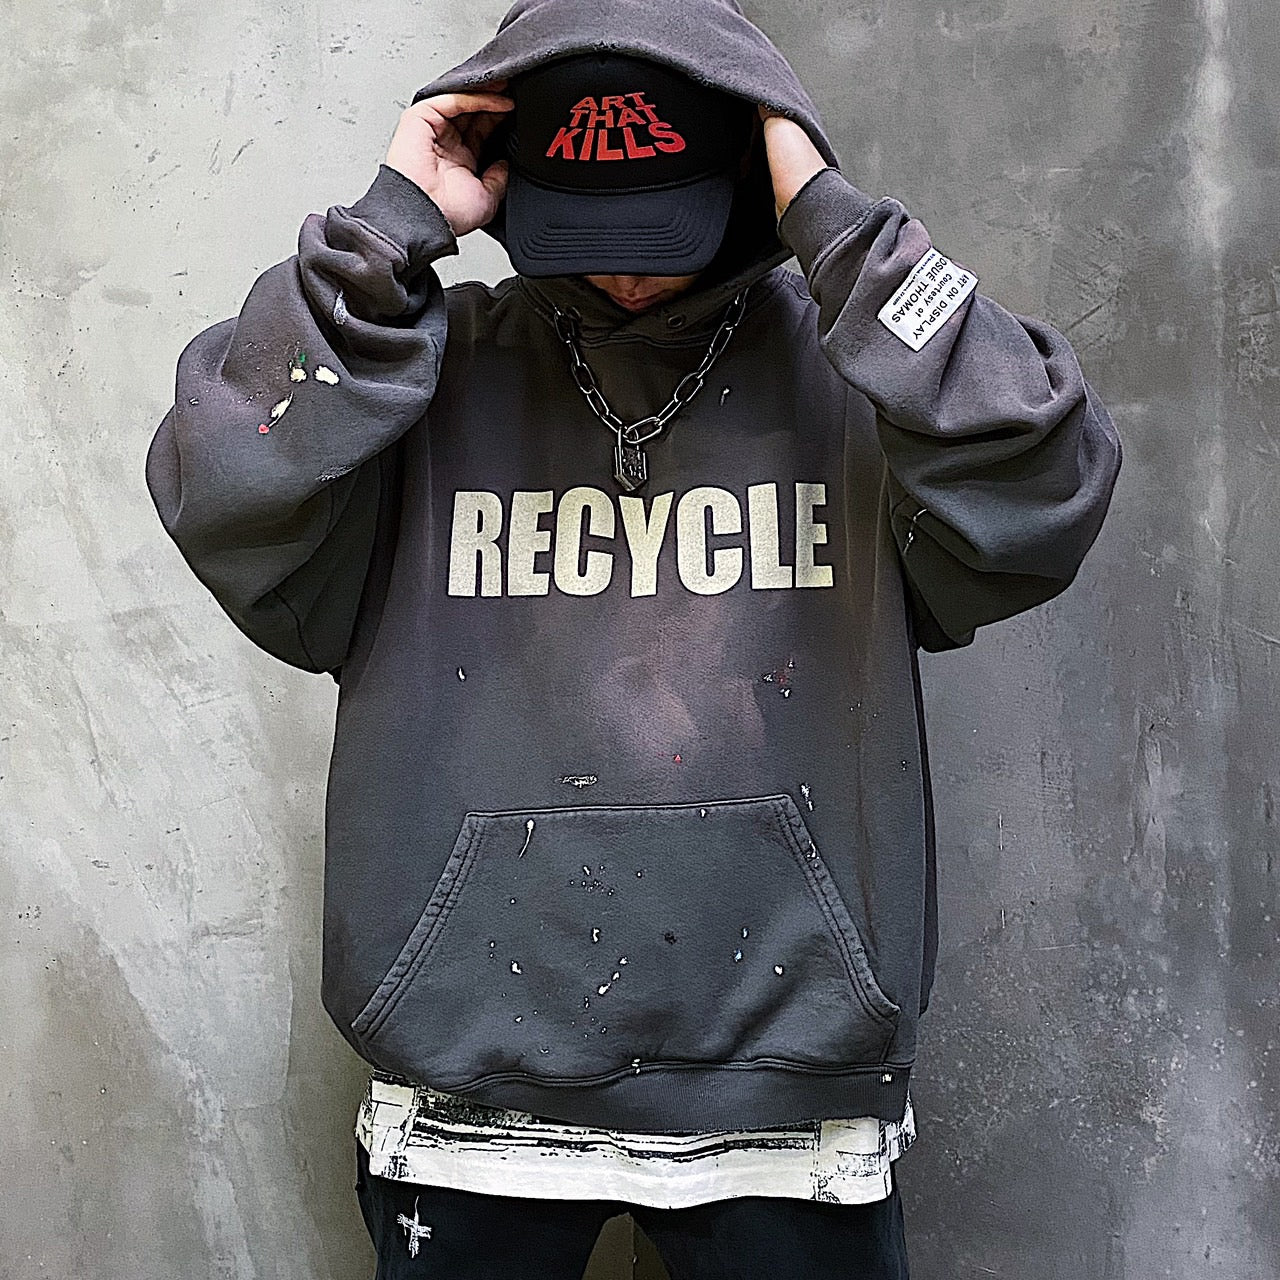 【GALLERY DEPT.】<br> A lineup of 23SS items such as new wear and accessories!